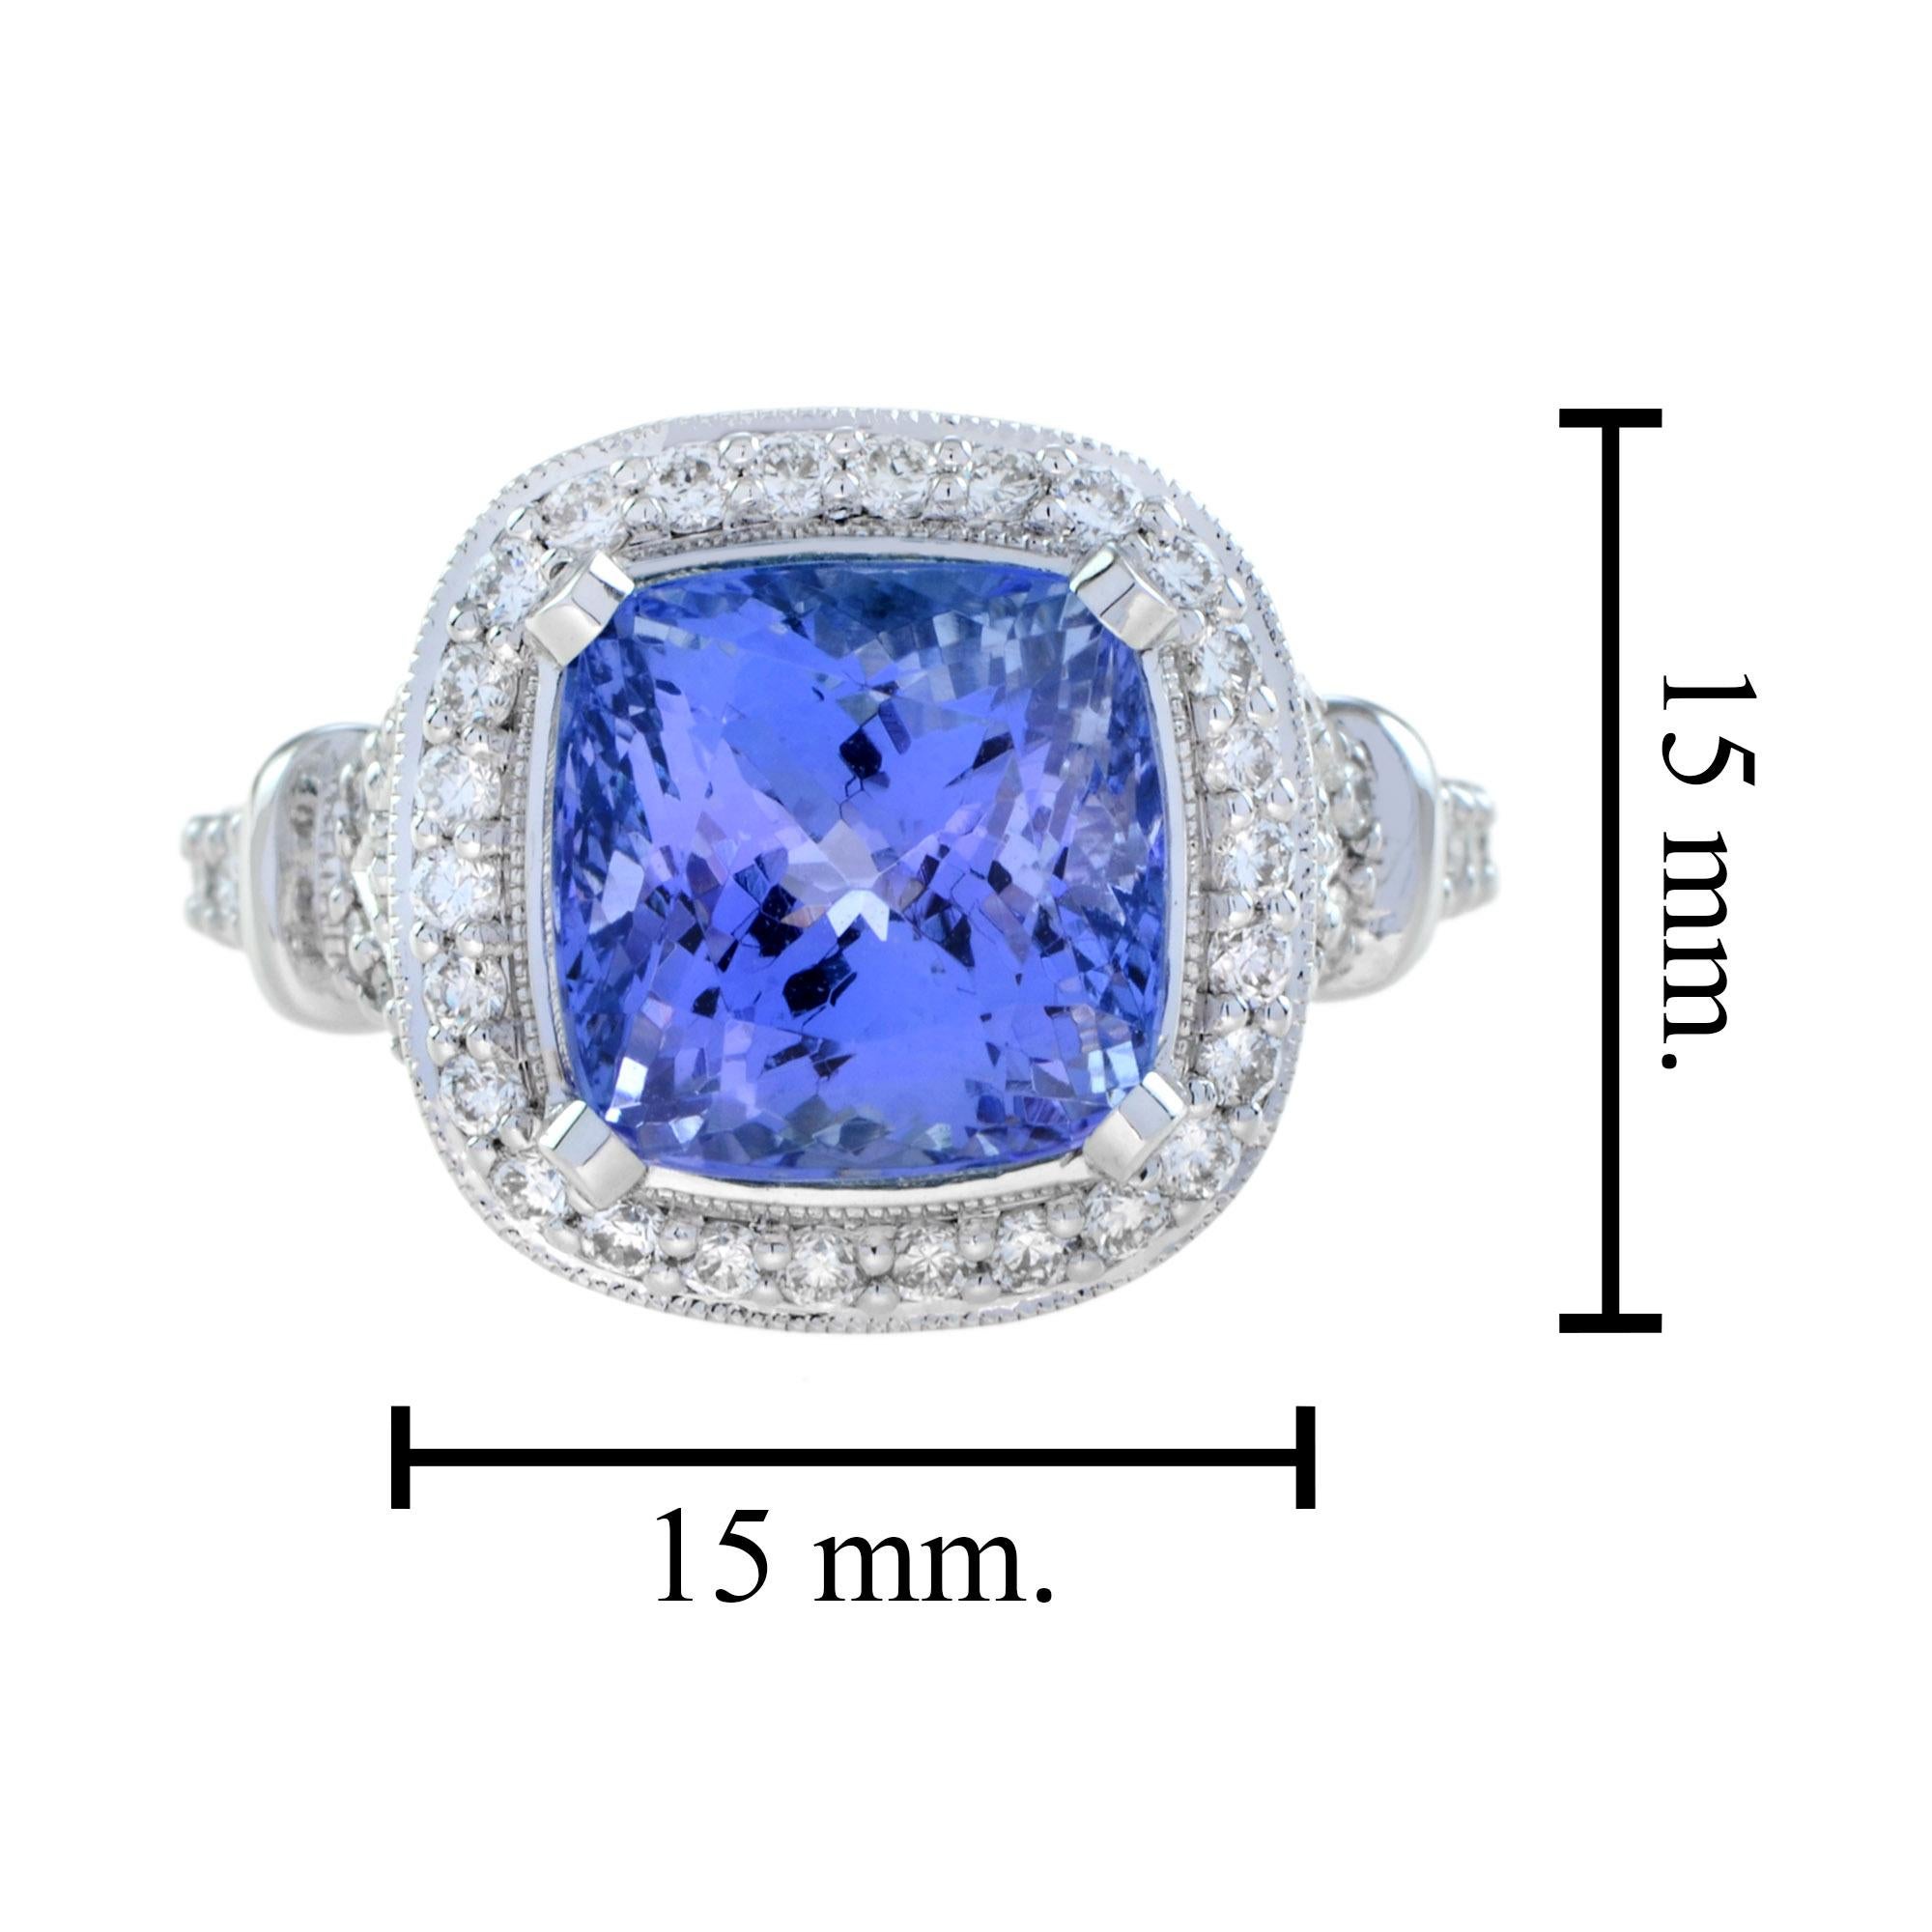 Certified 6.68 Ct. Cushion Tanzanite Diamond Engagement Ring in 18K White Gold For Sale 3